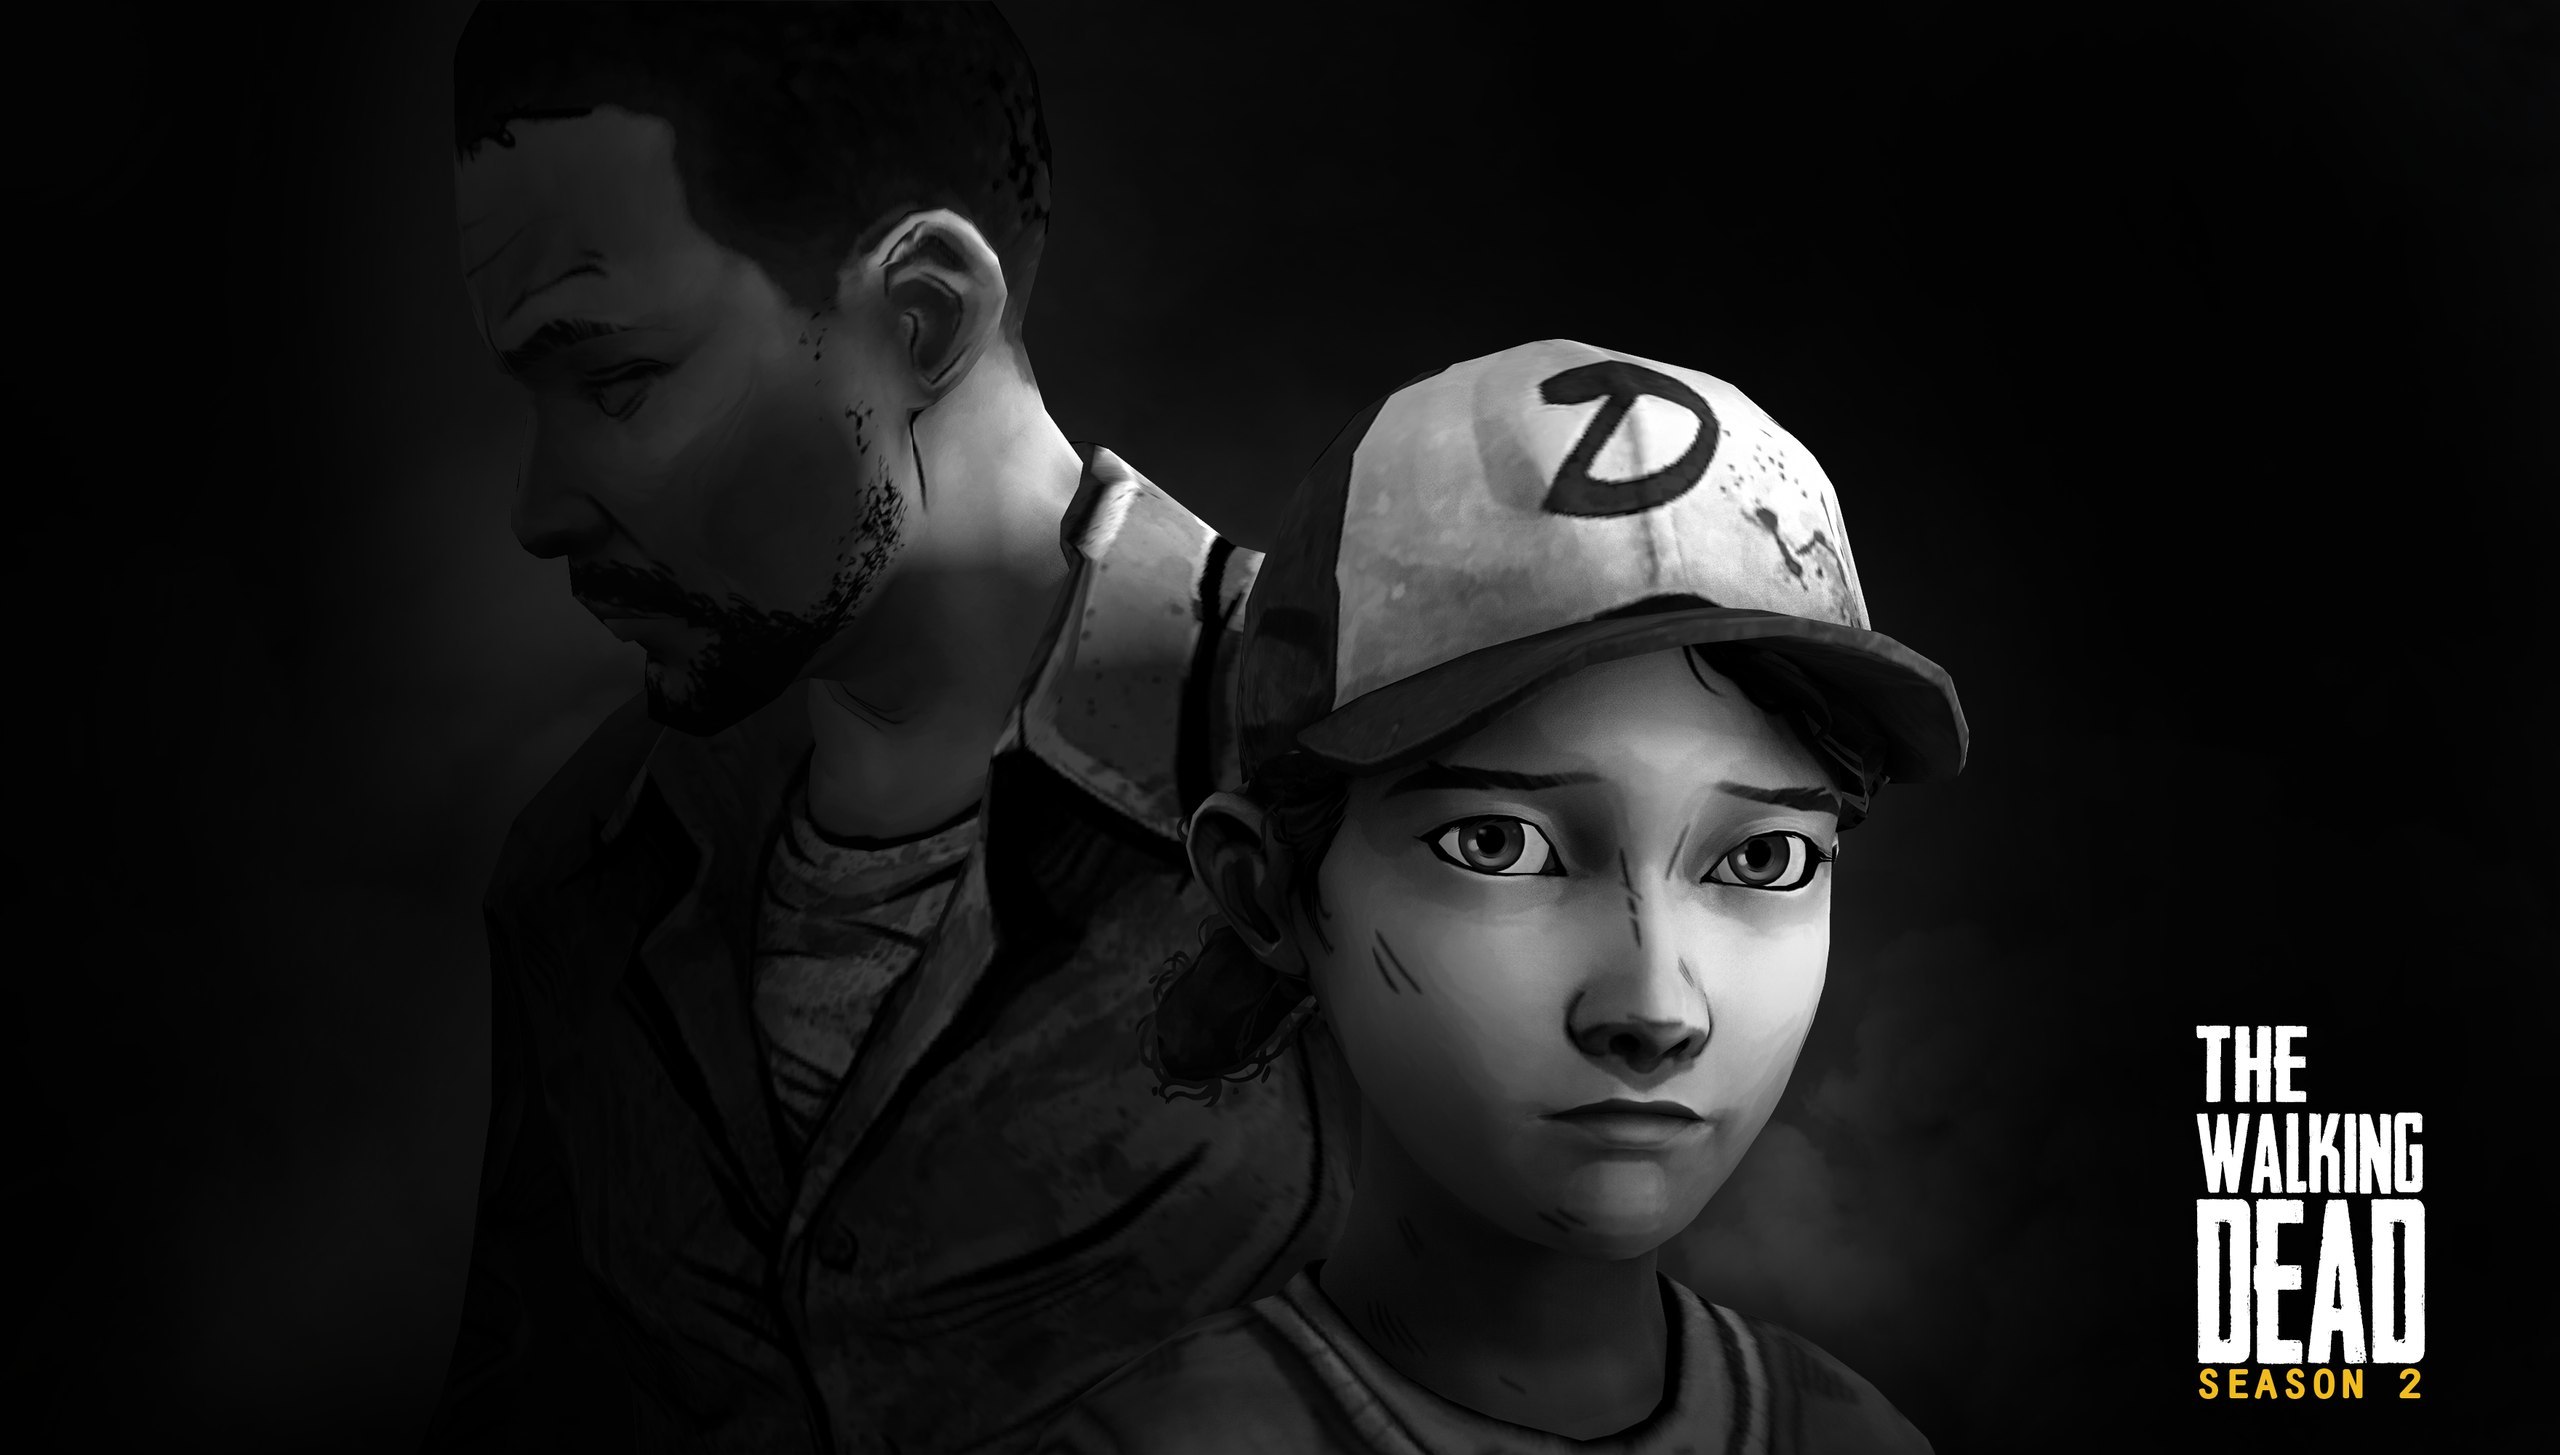 Lee And Clementine